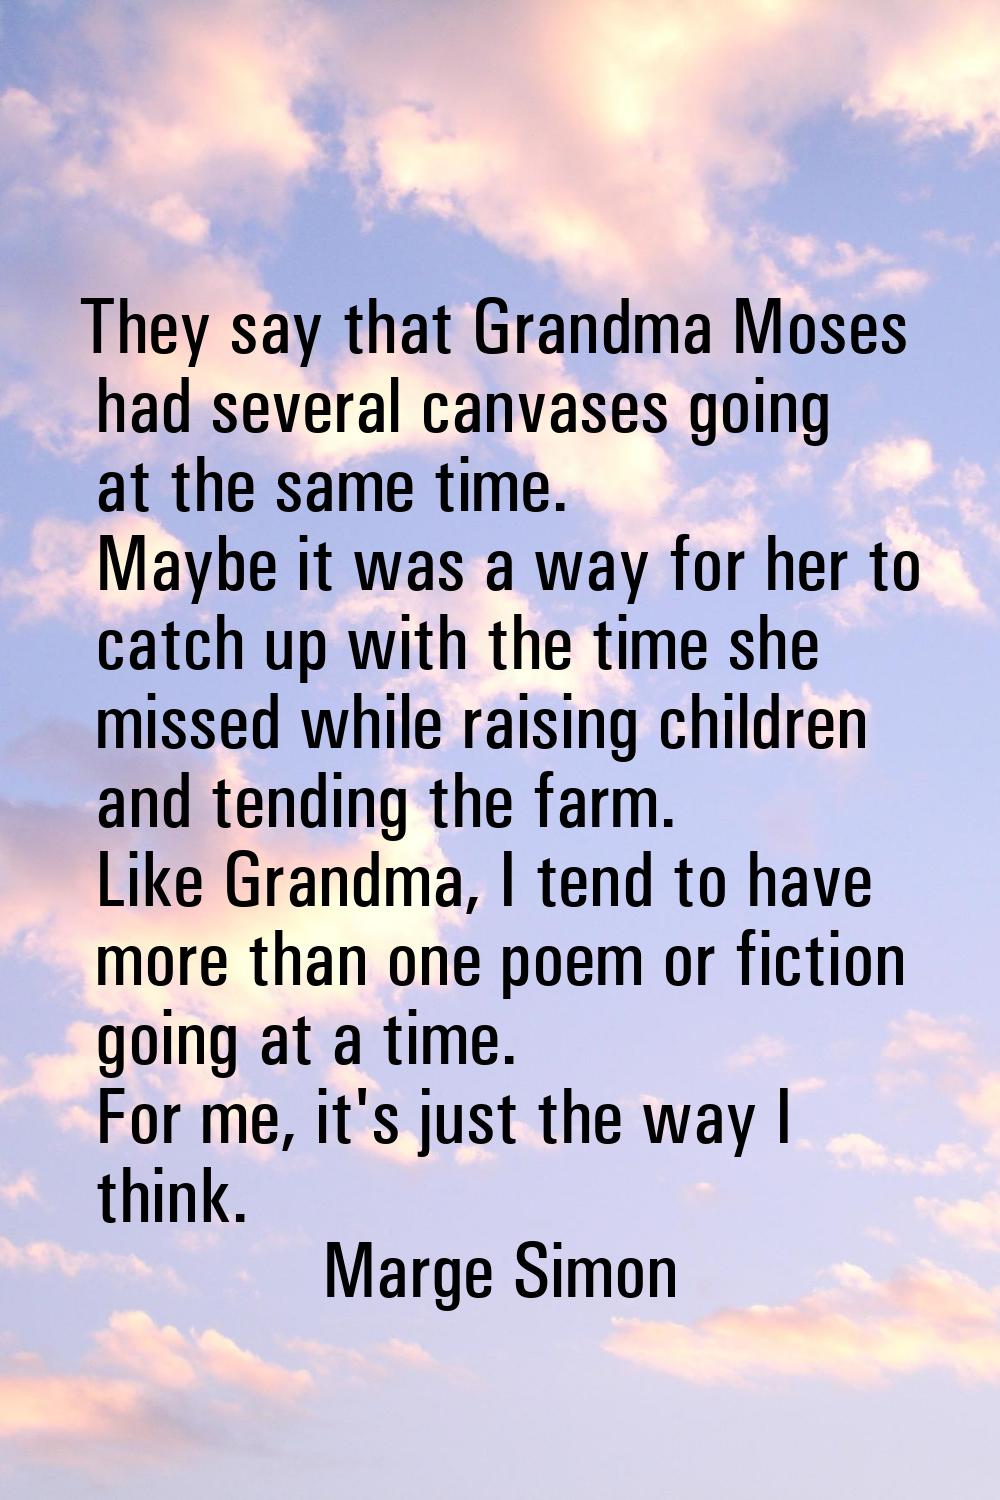 They say that Grandma Moses had several canvases going at the same time. Maybe it was a way for her